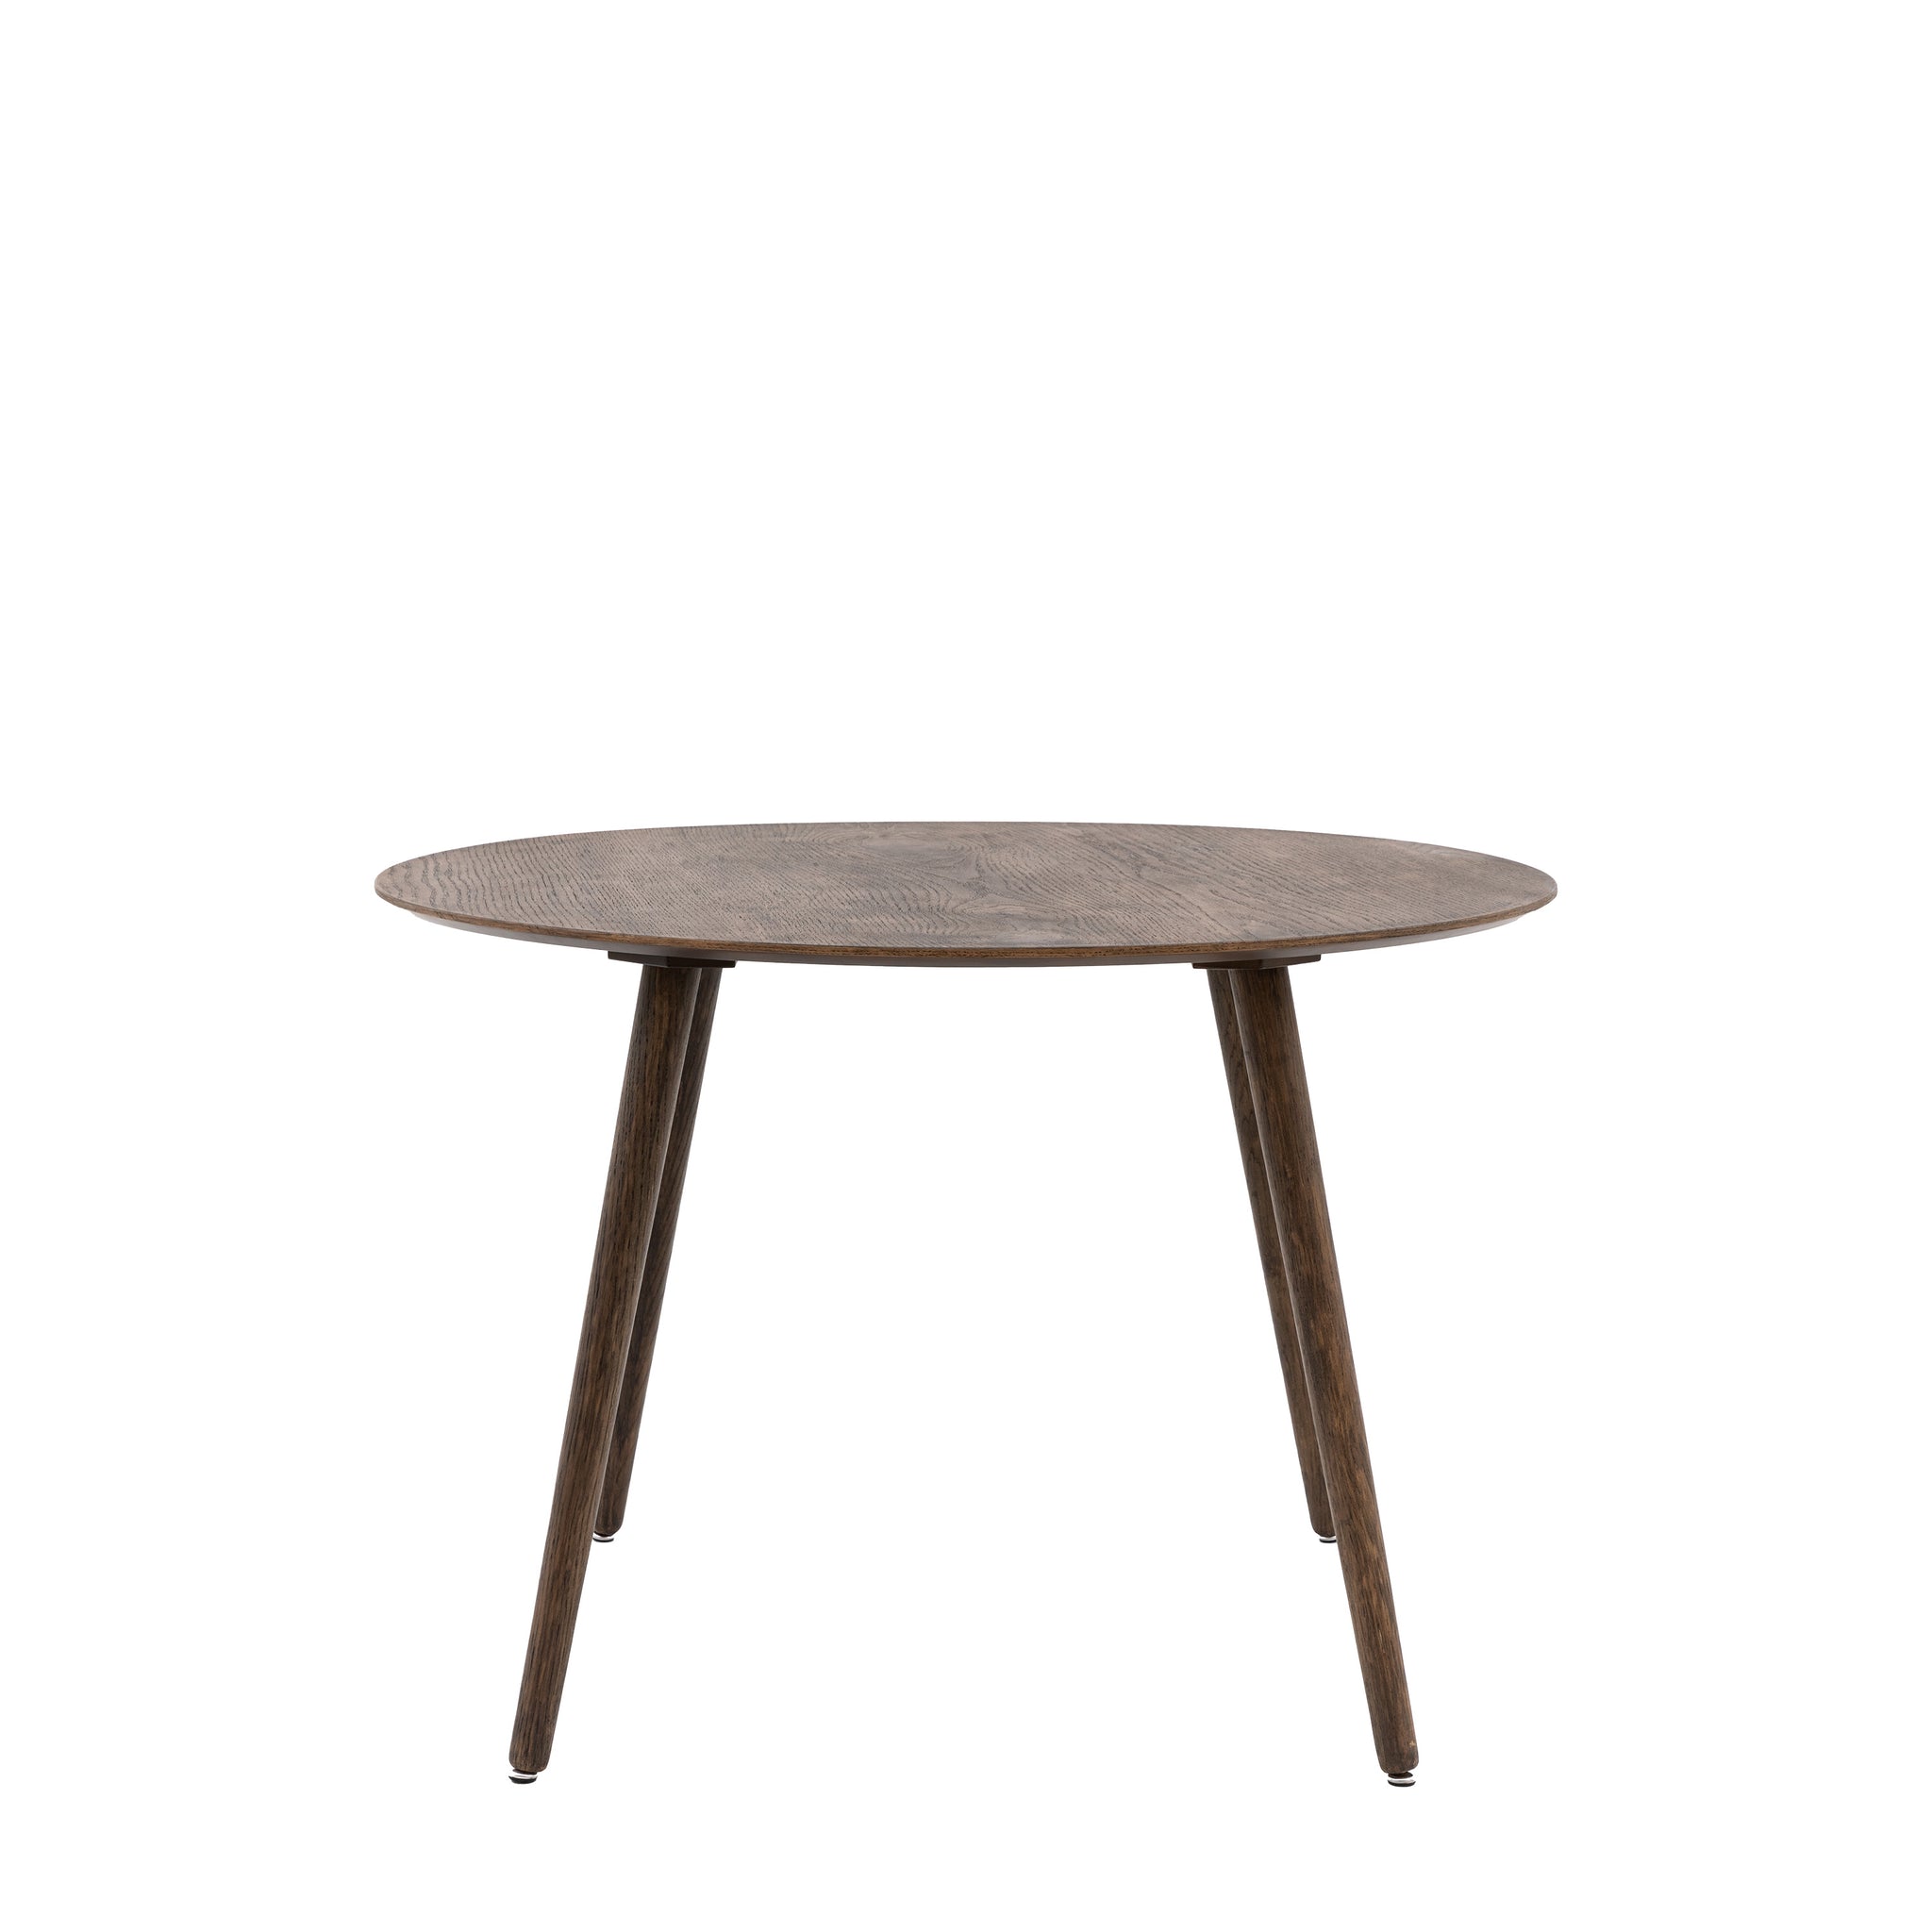 Harker Round Dining Table Smoked